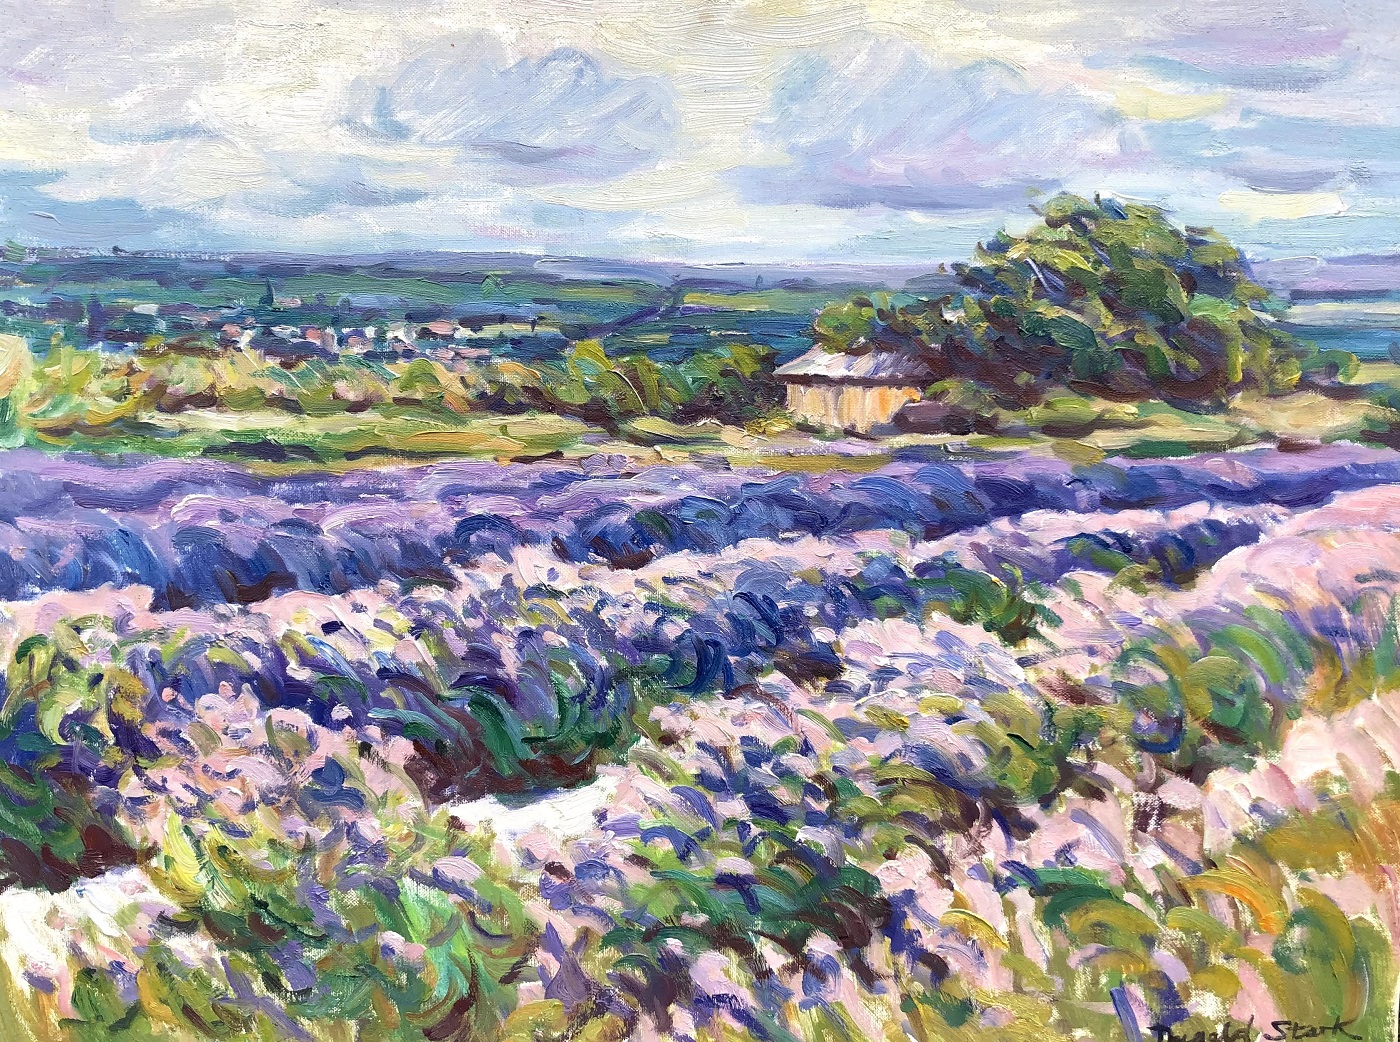 Image of a card painted by Dugald Stark called Lavendar Fields